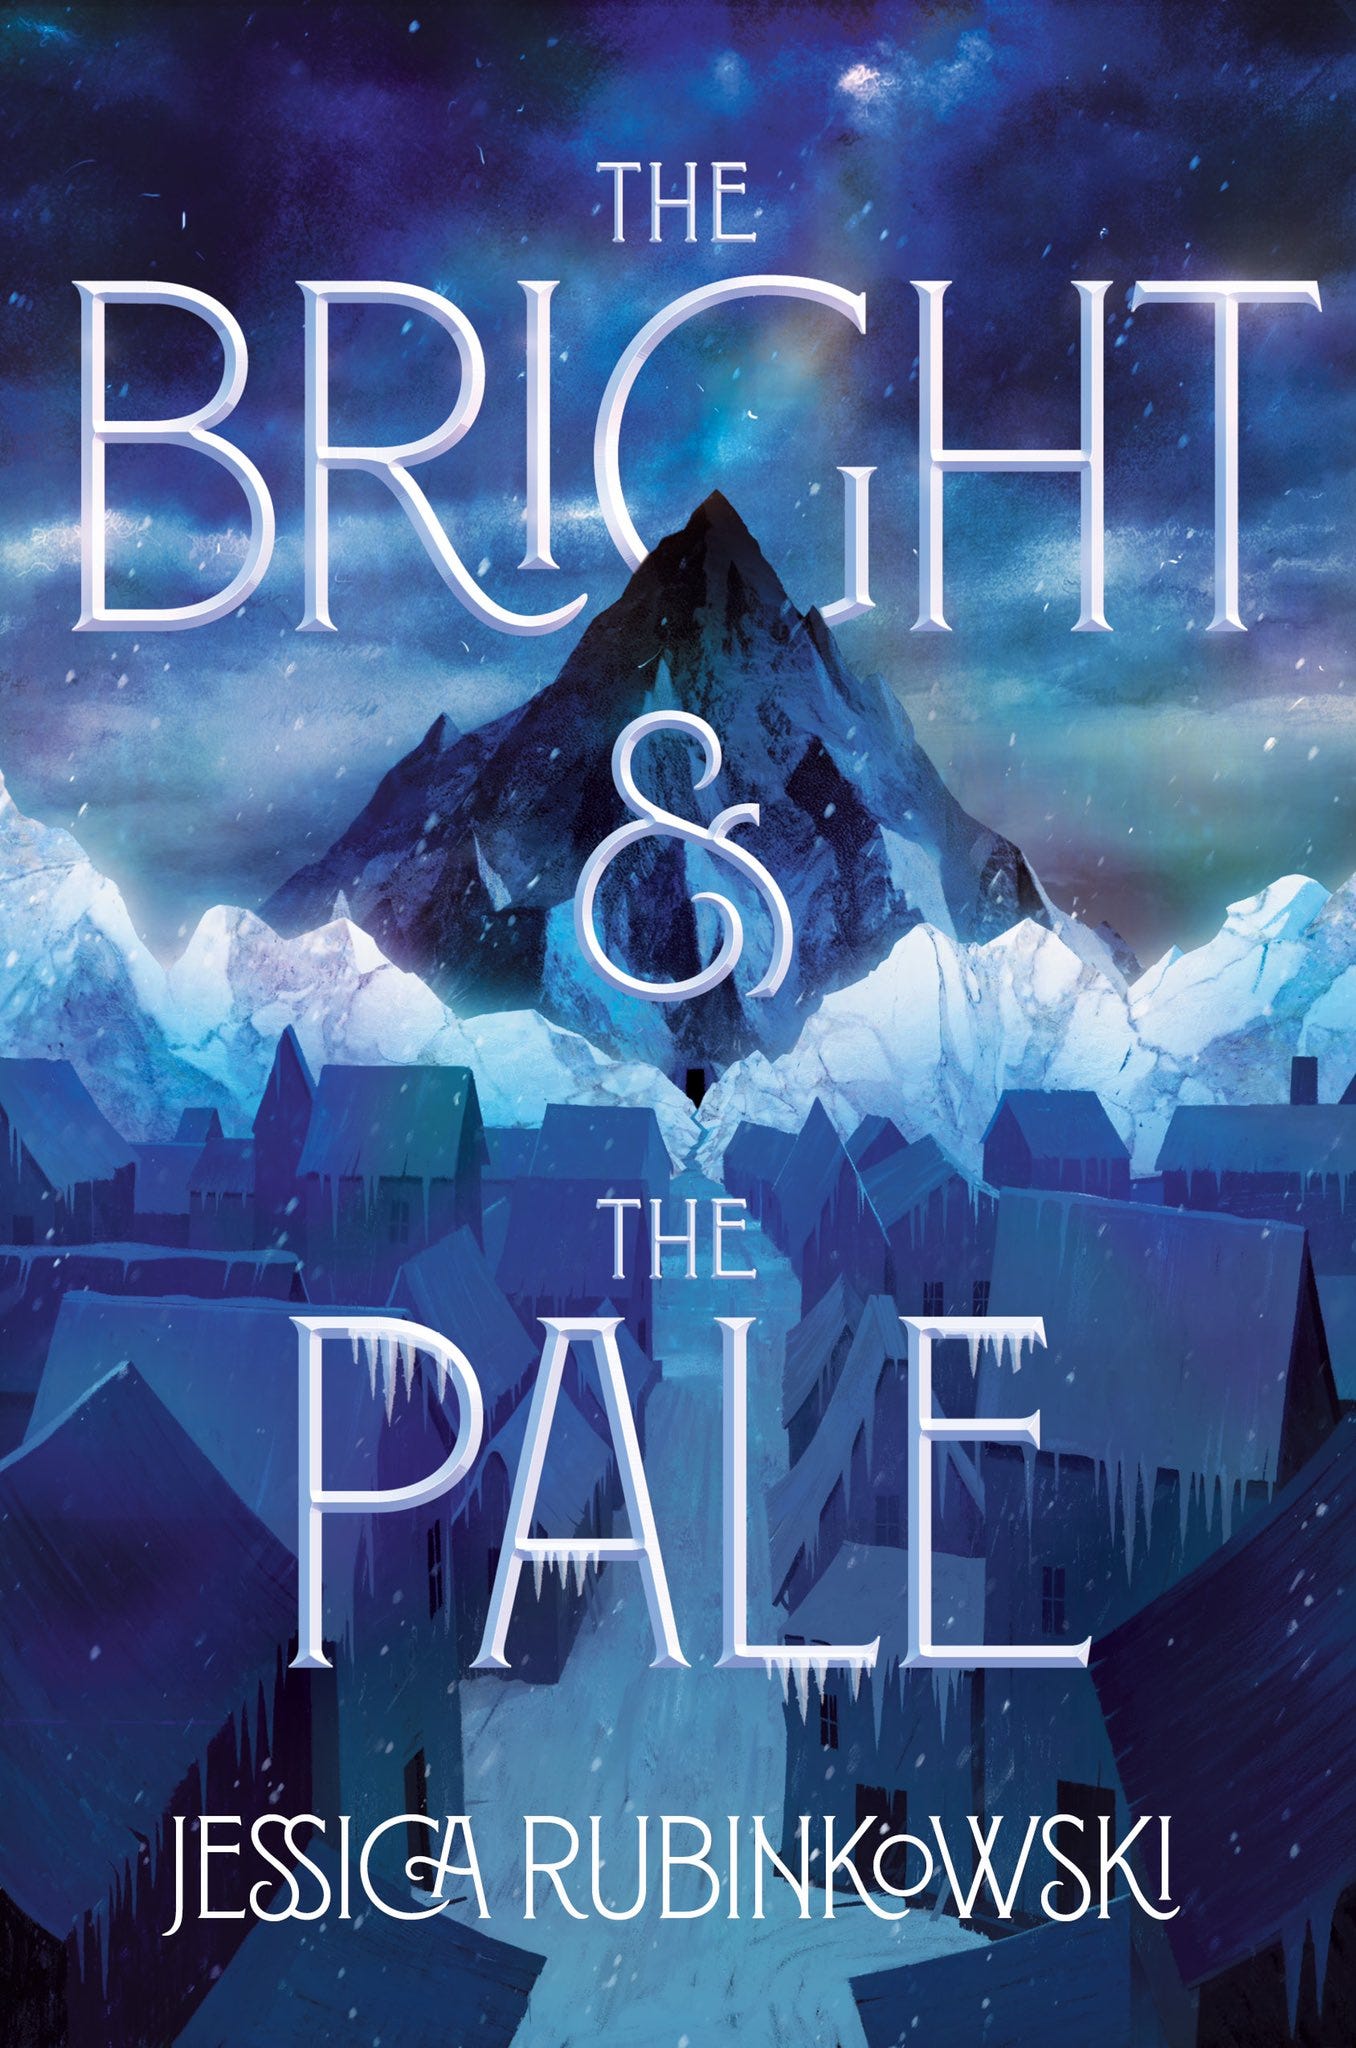 The Bright and the Pale by Jessica Rubinowski